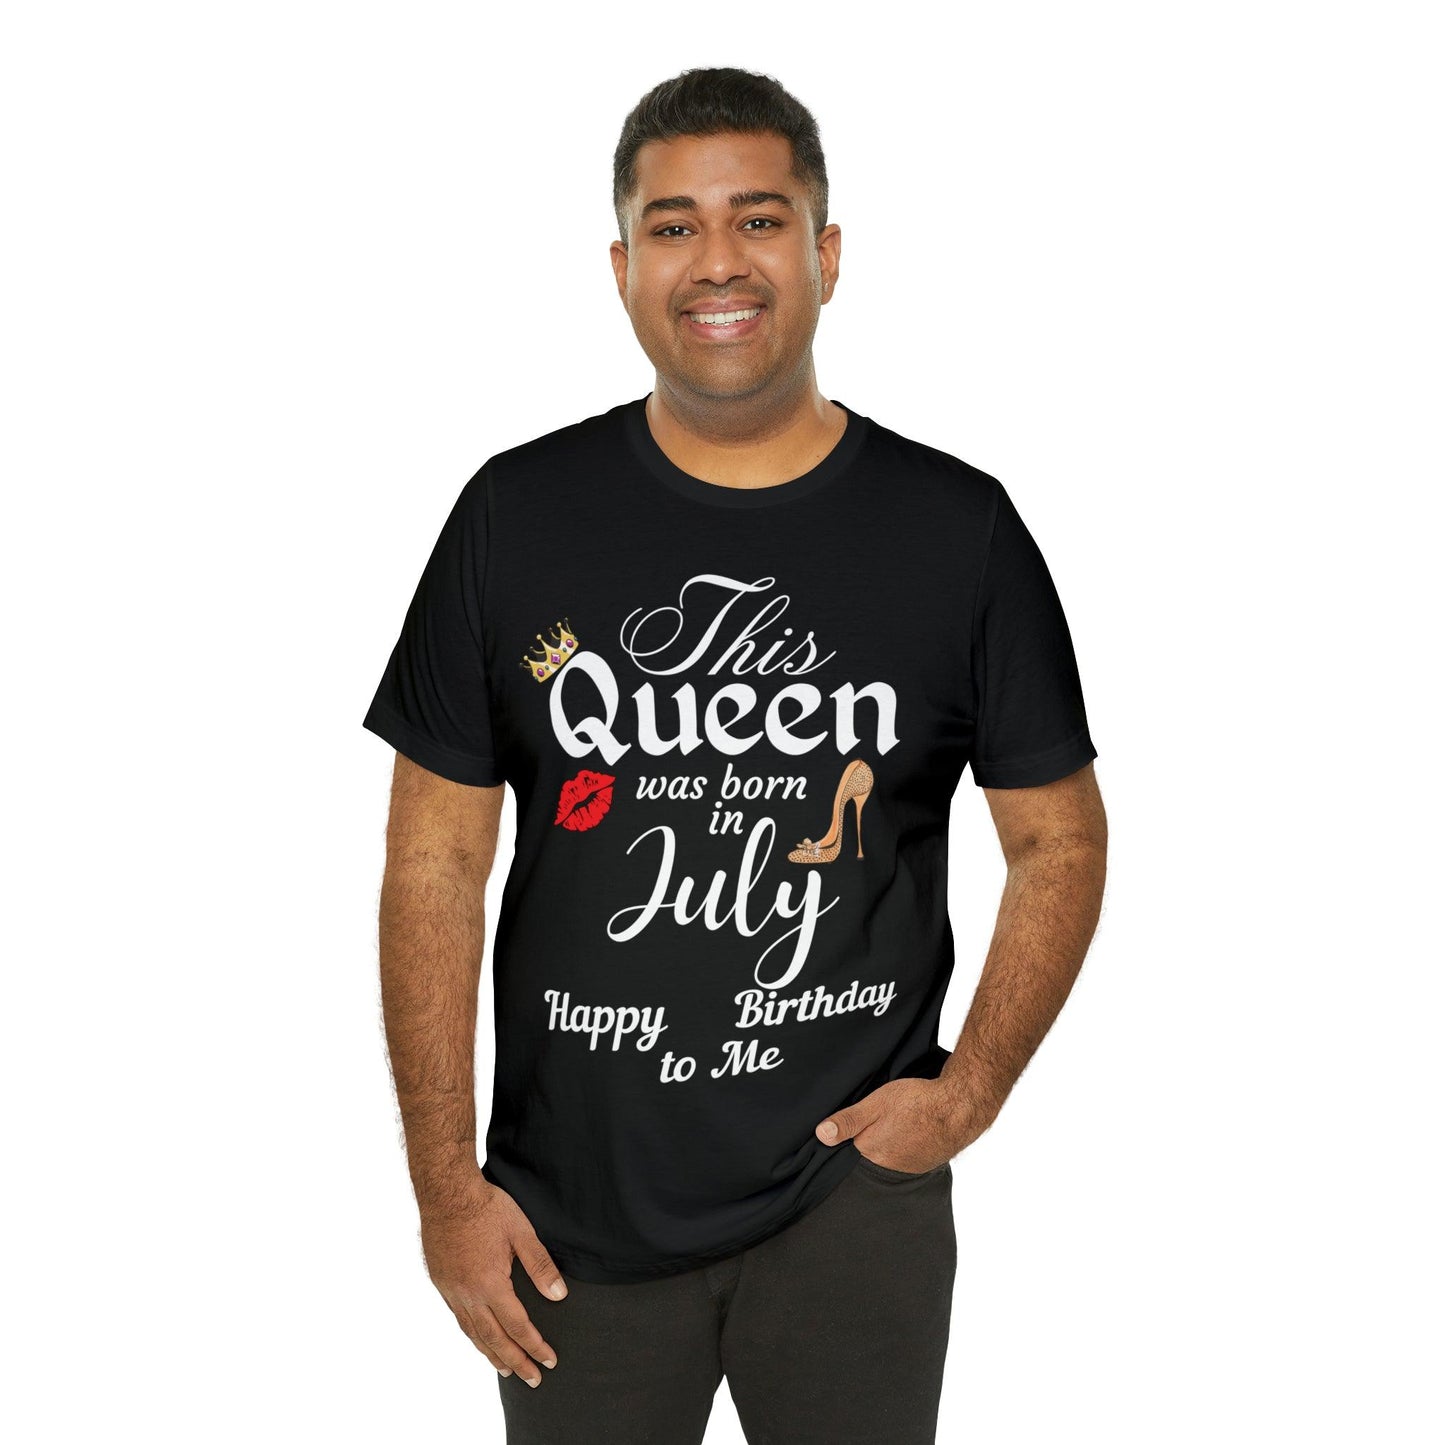 Birthday Queen Shirt, Gift for Birthday, This Queen was born in July Shirt, Funny Queen Shirt, Funny Birthday Shirt, Birthday Gift